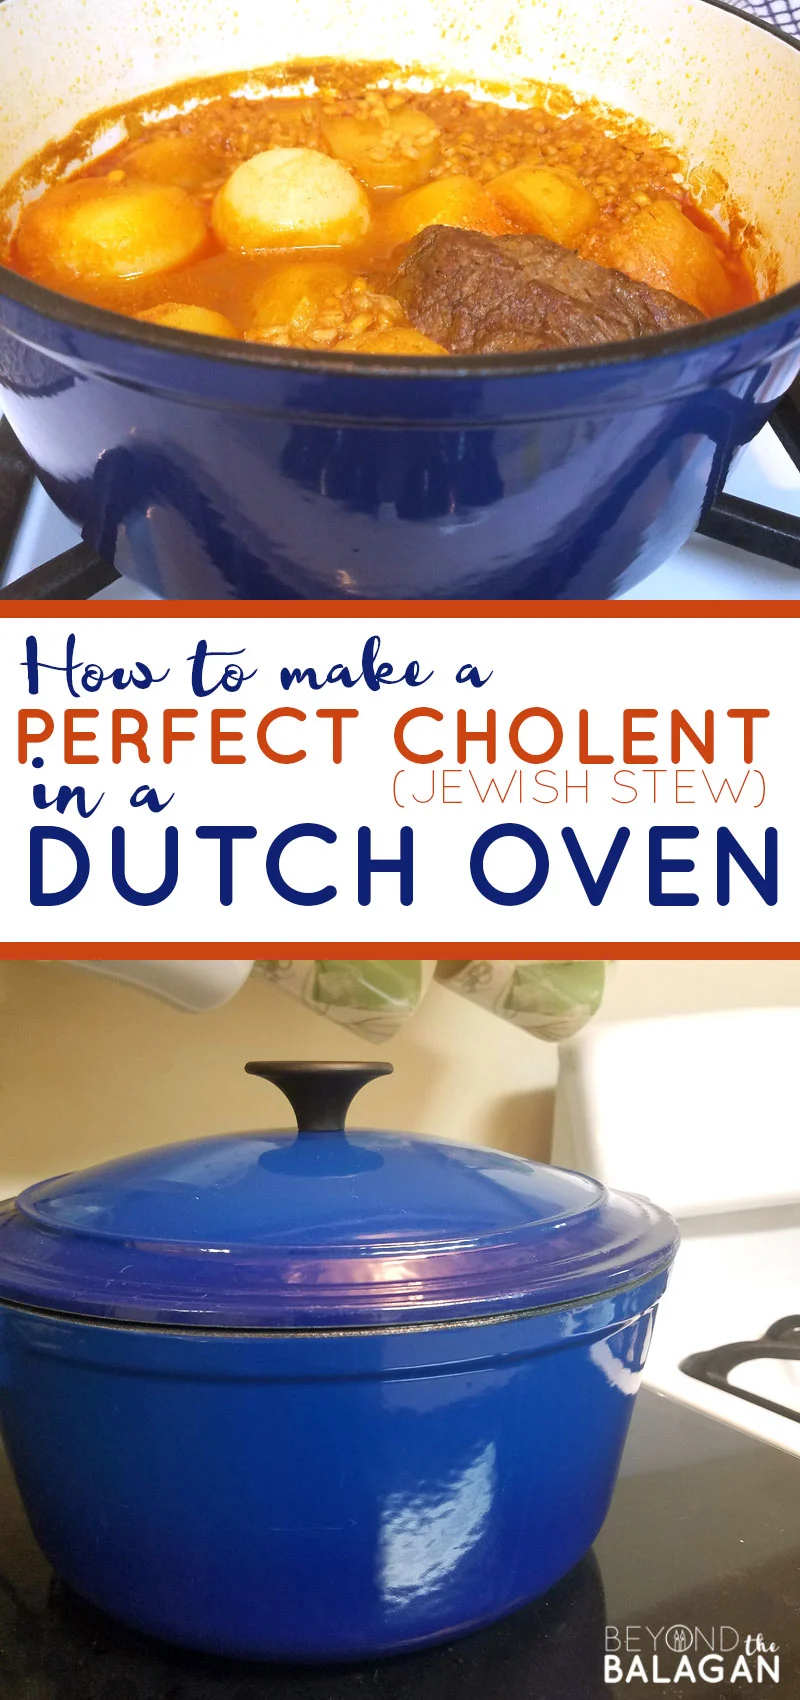 Click for the recipe that made me start loving Cholent - or Jewish slow cooked overnight stew! This is the best cholent recipe ever according to my husband. Make it in the dutch oven or in a crock pot or regular pot - but a le creuset dutch oven is best #jewish #cholent #recipe #jewishcuisine #jewishcooking #kosher #kosherrecipe